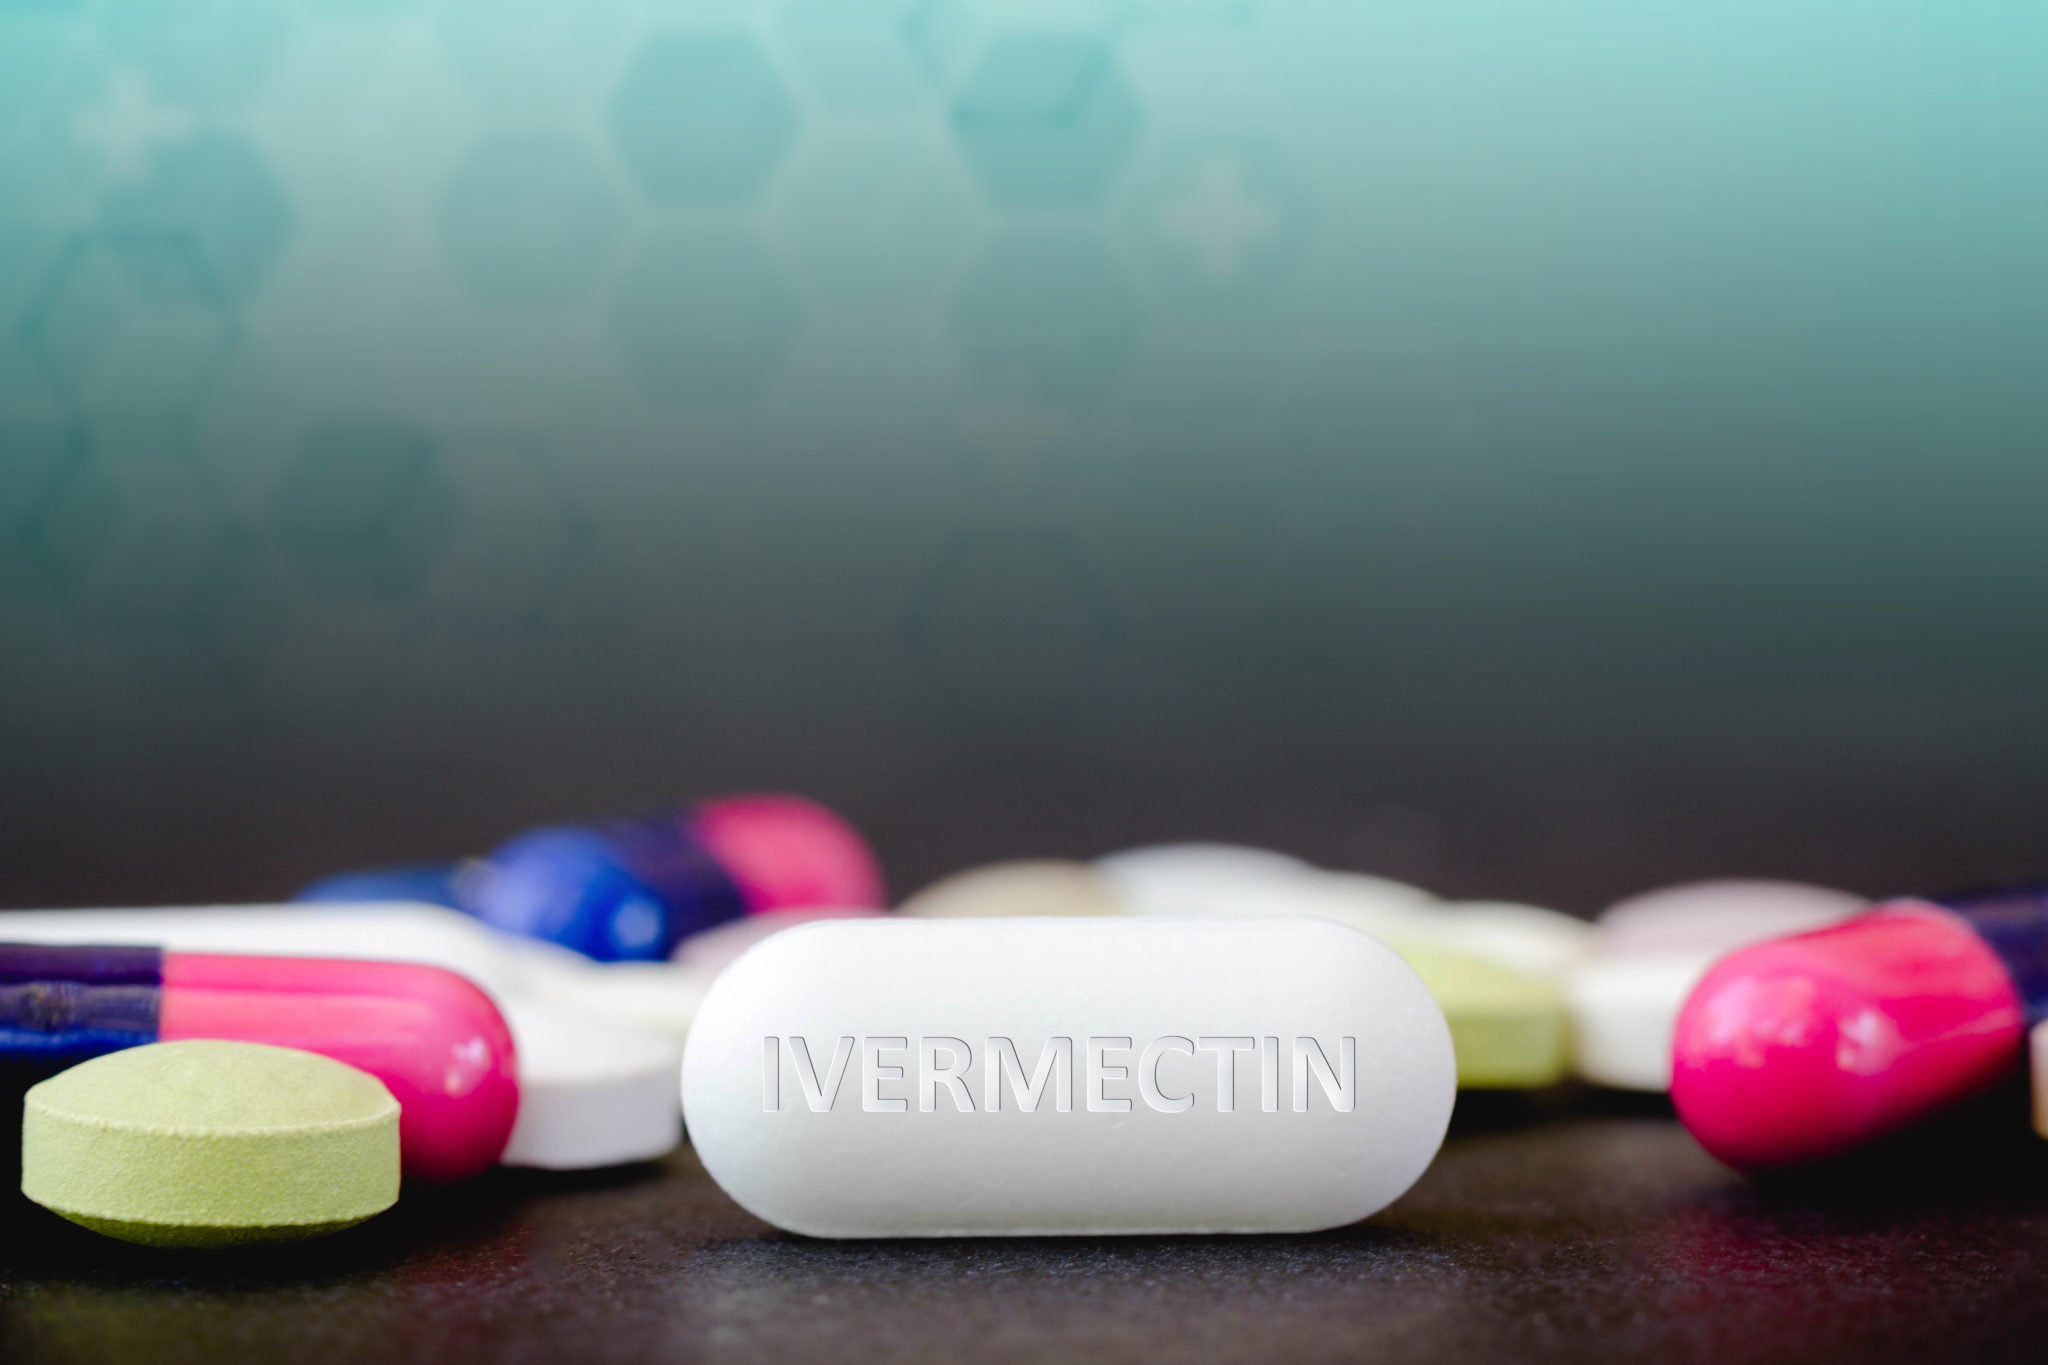 3 Reasons Not to Use Ivermectin for COVID-19